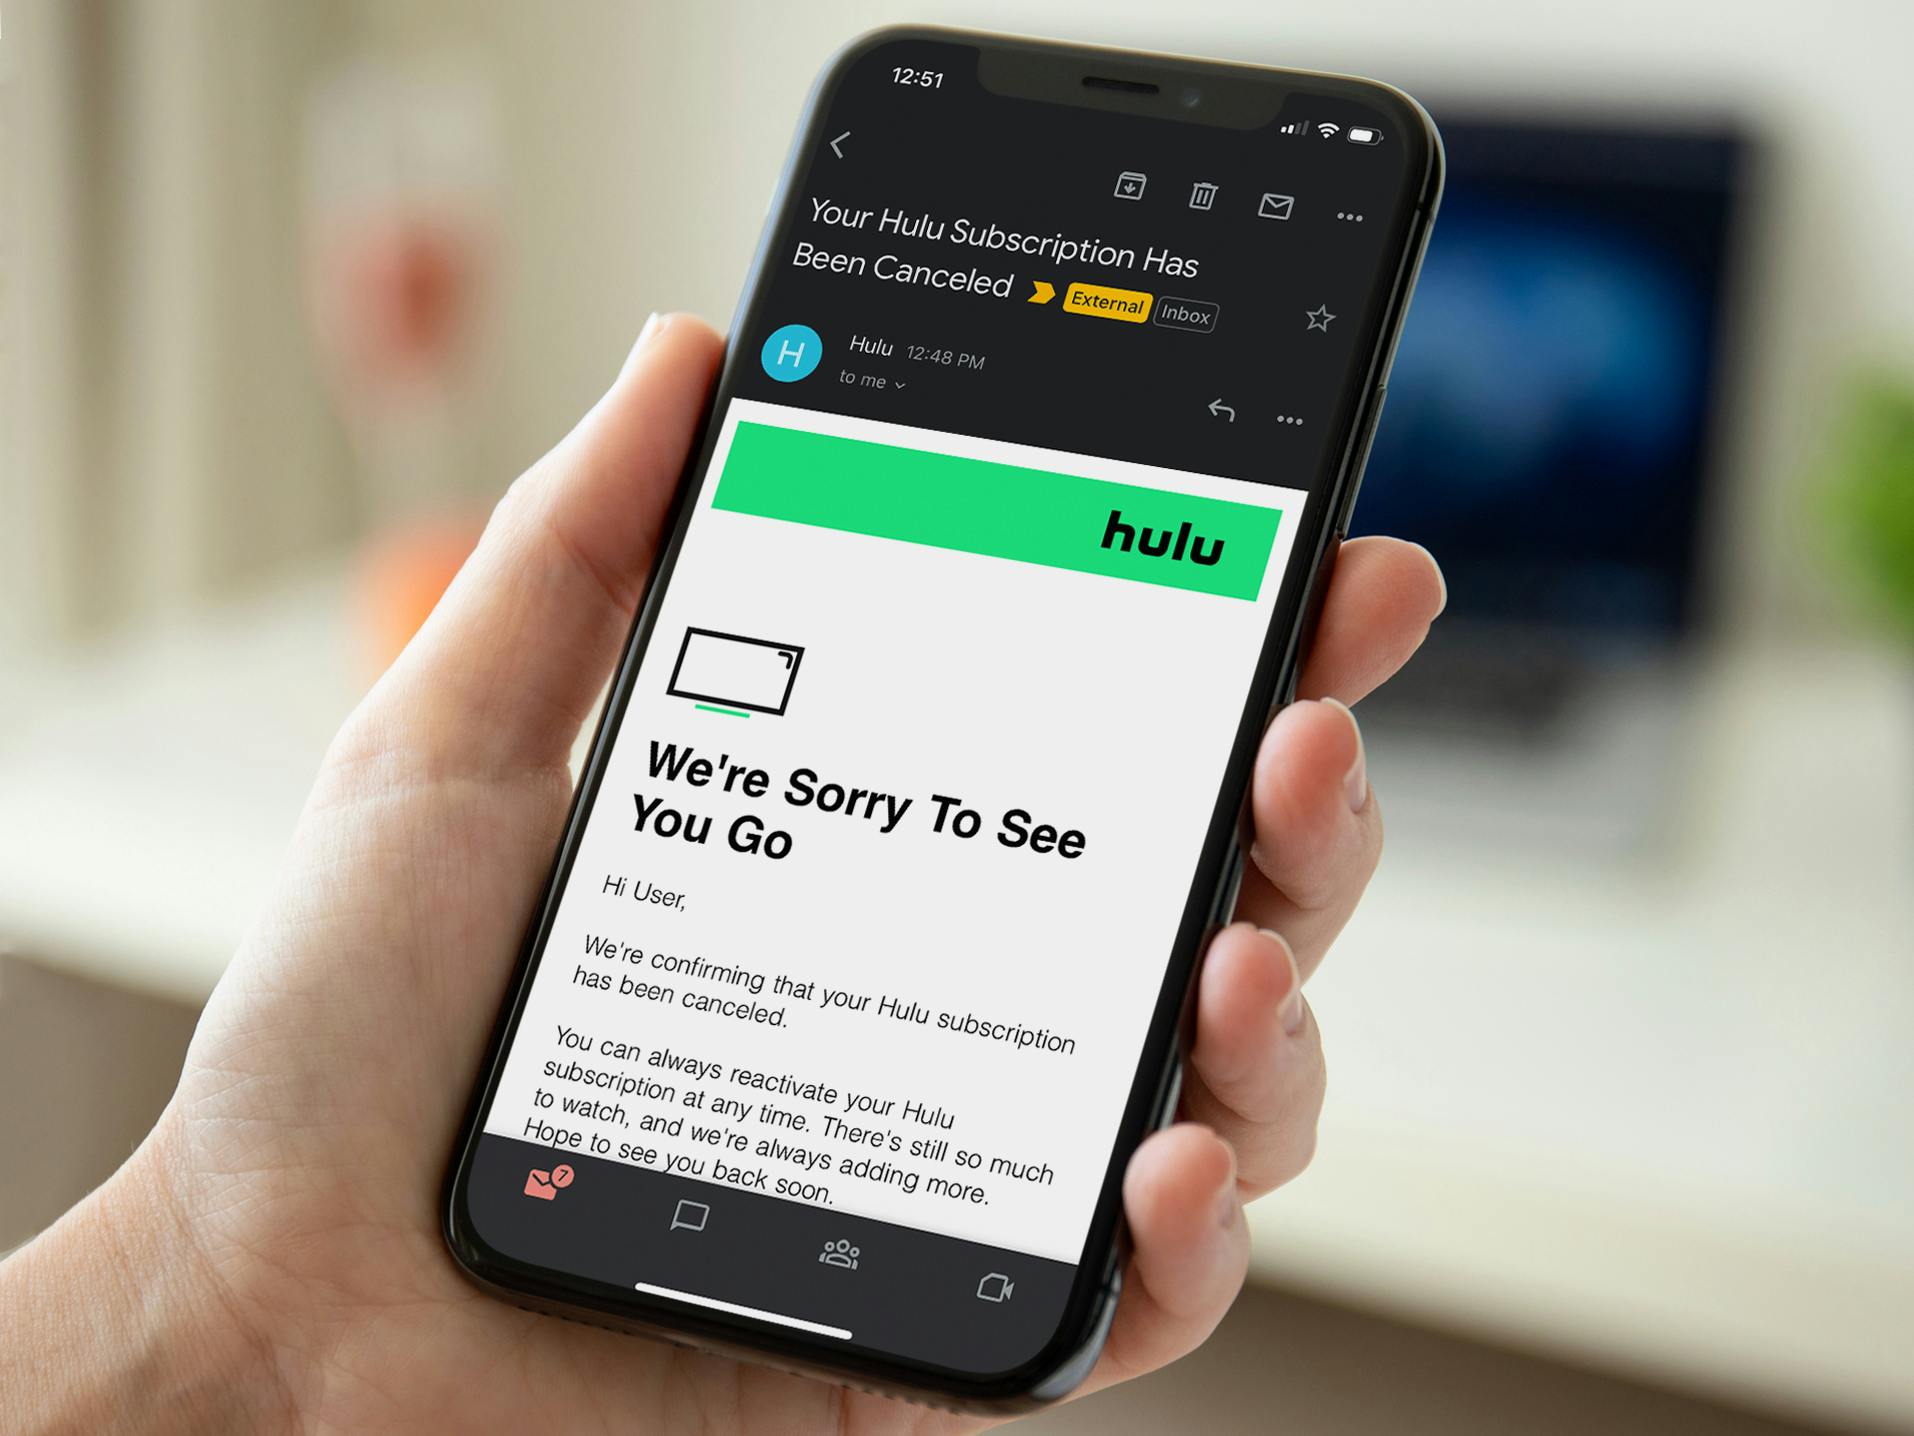 Someone holding a cell phone displaying their confirmation email about canceling their Hulu subscription